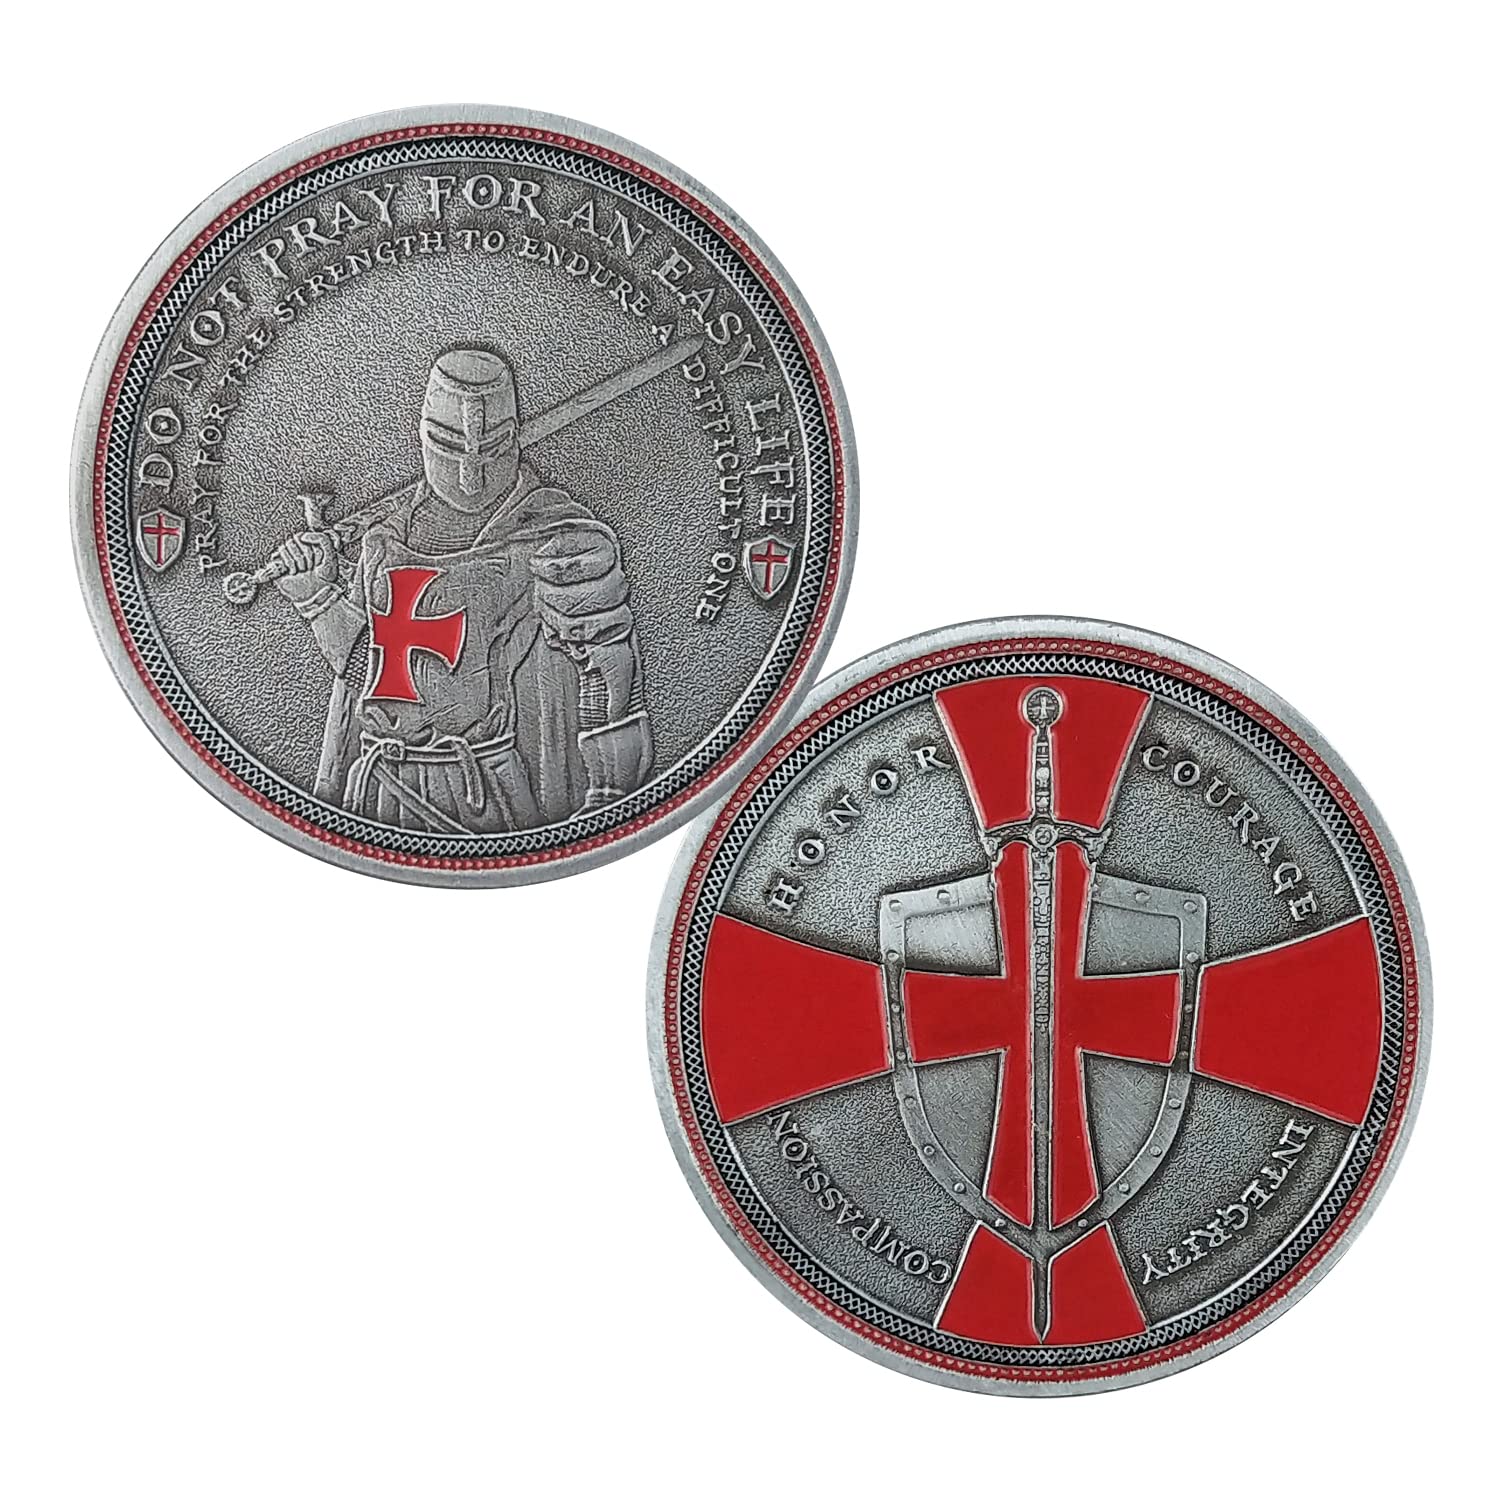 A silver coin with a red X over it.